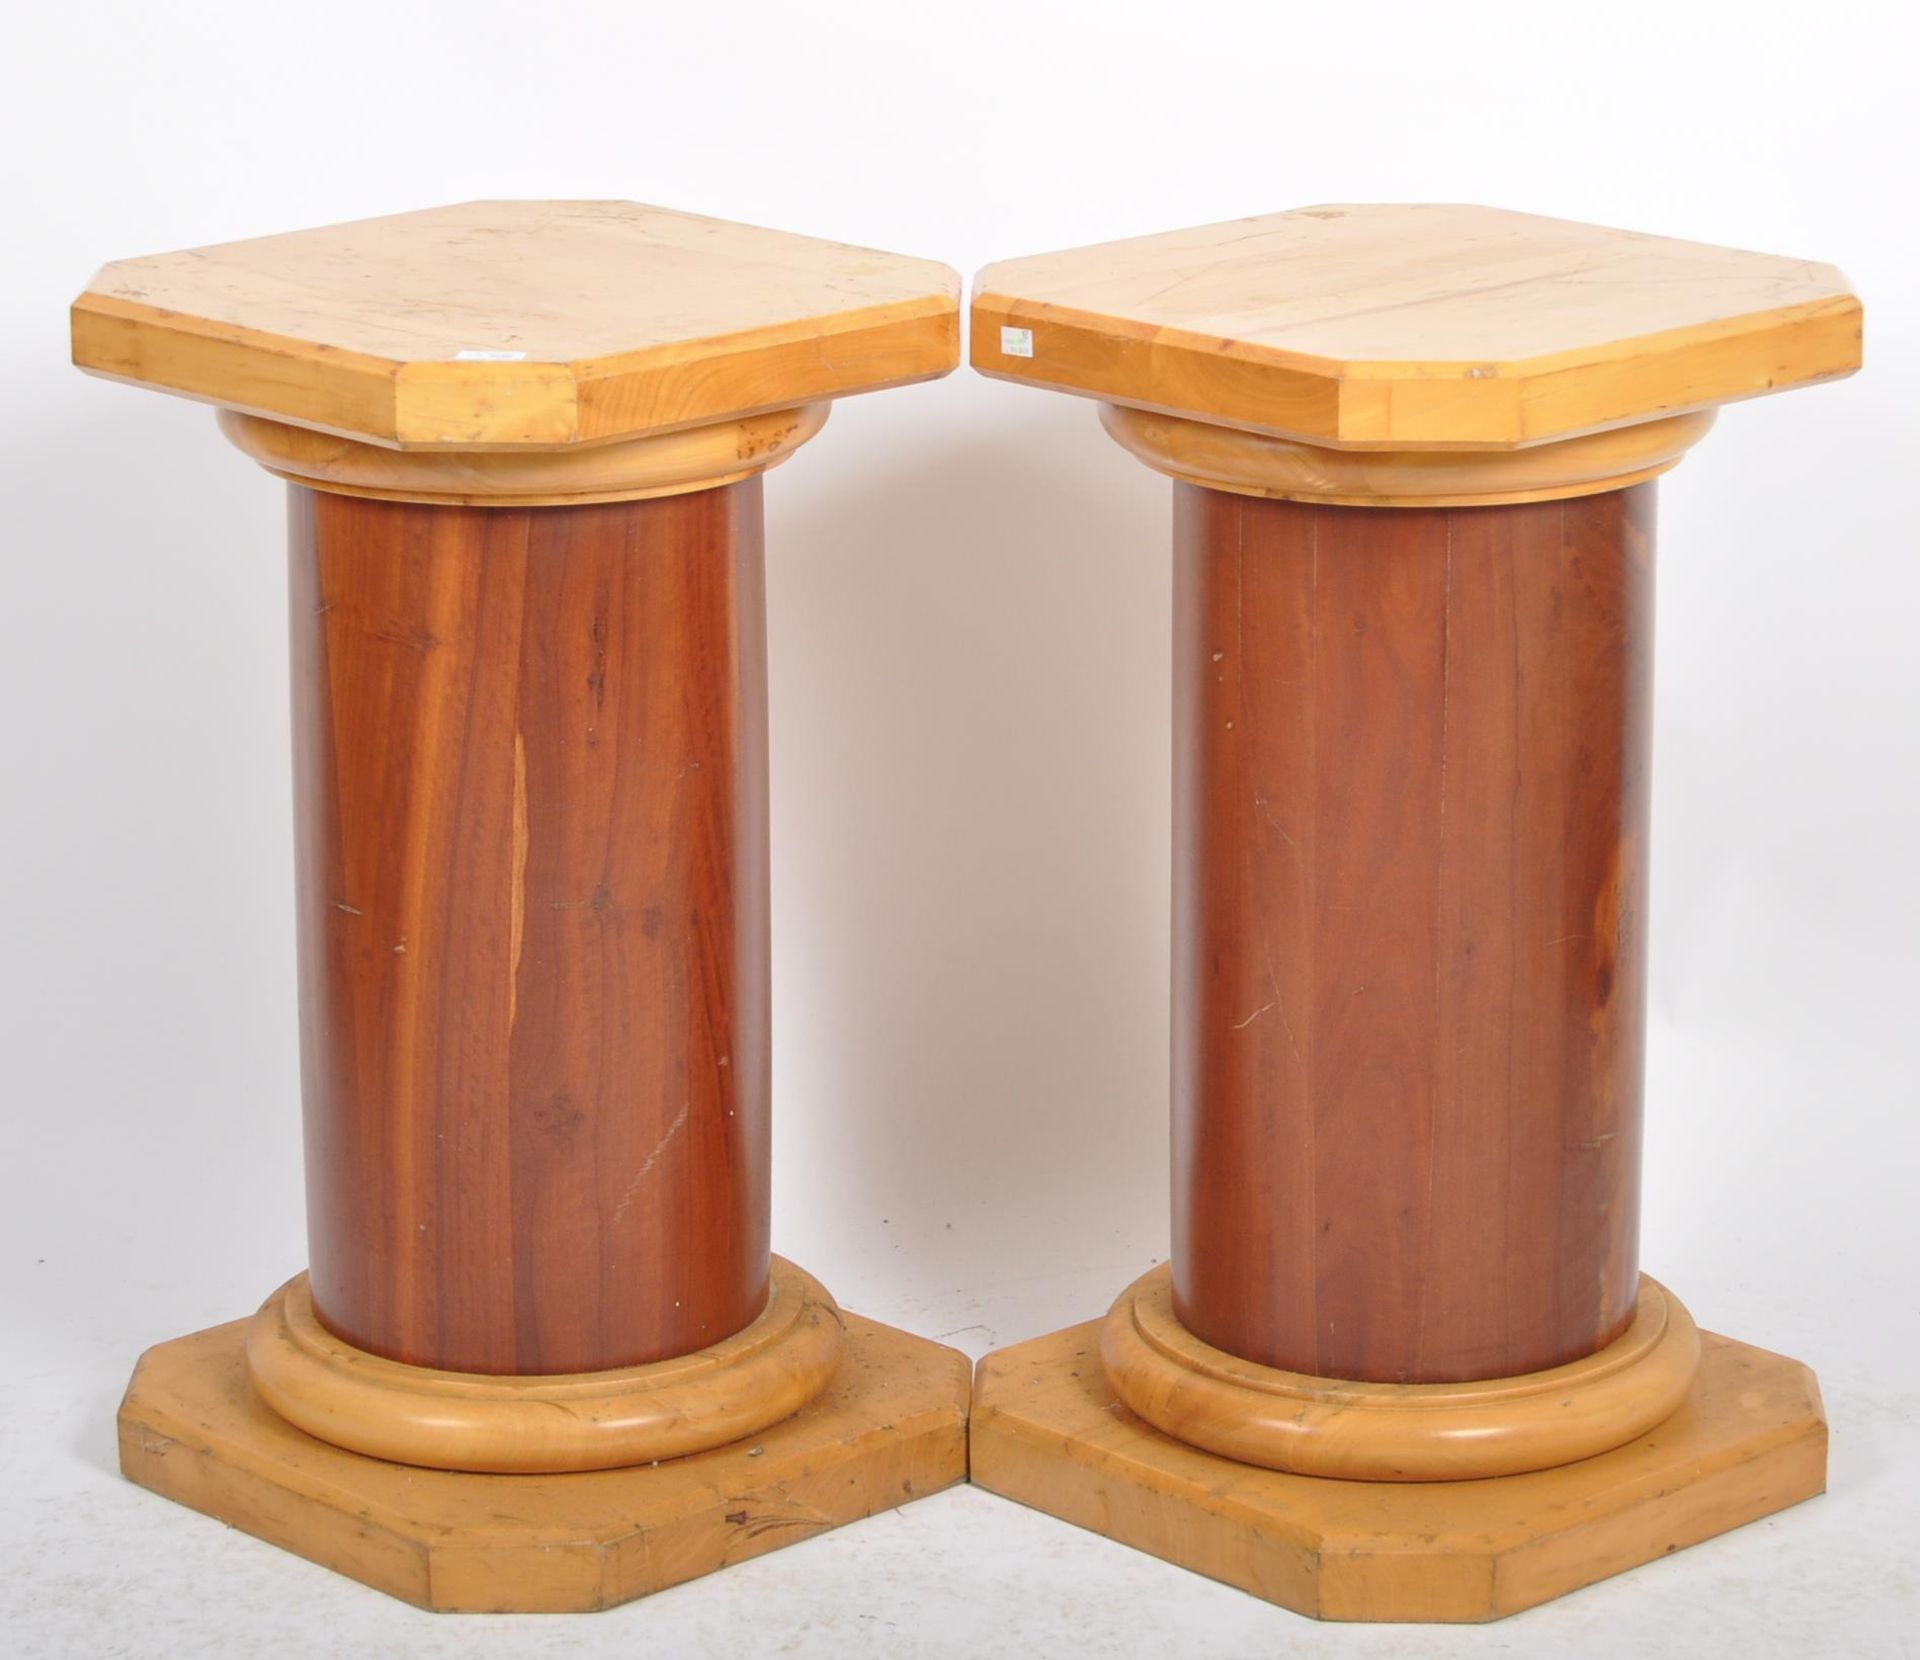 PAIR OF 20TH CENTURY PEDESTAL JARDINIERE BUST STANDS - Image 3 of 4